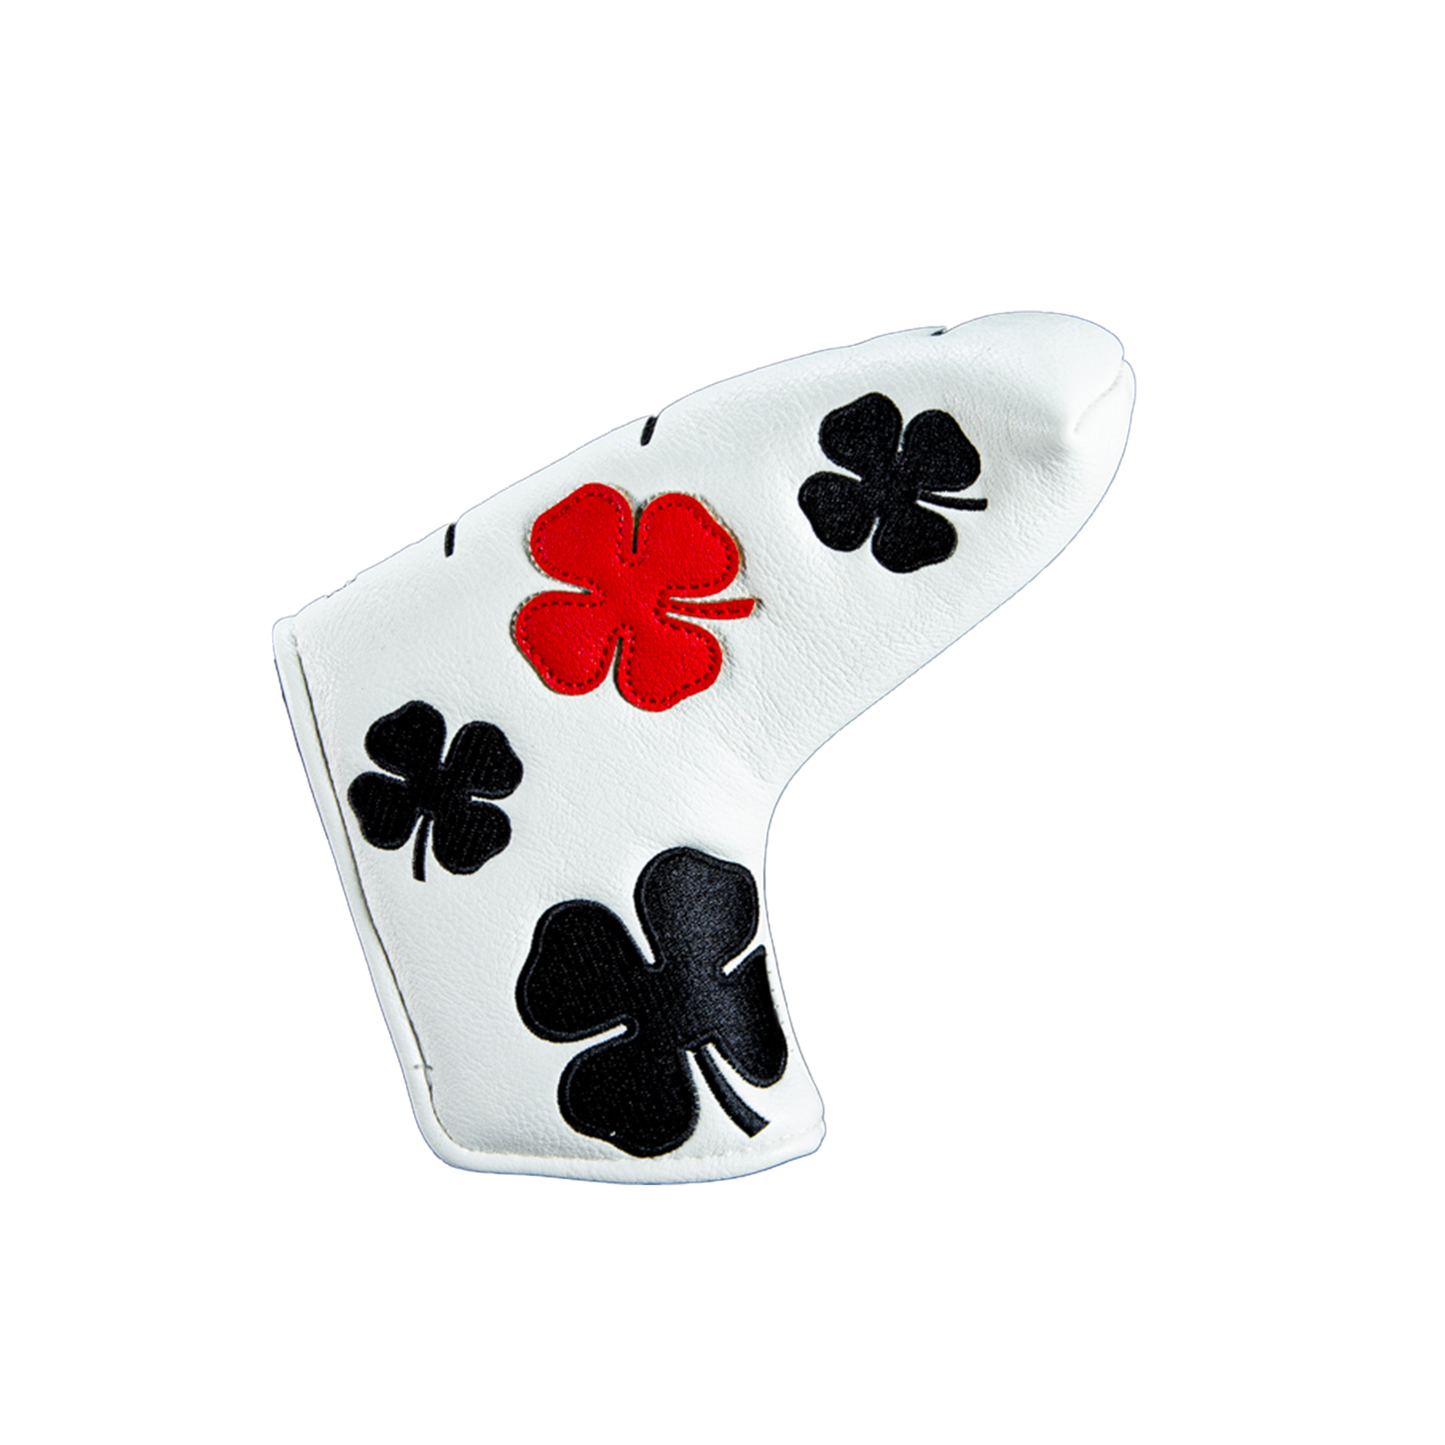 Live Lucky "Poker" Blade Putter Cover